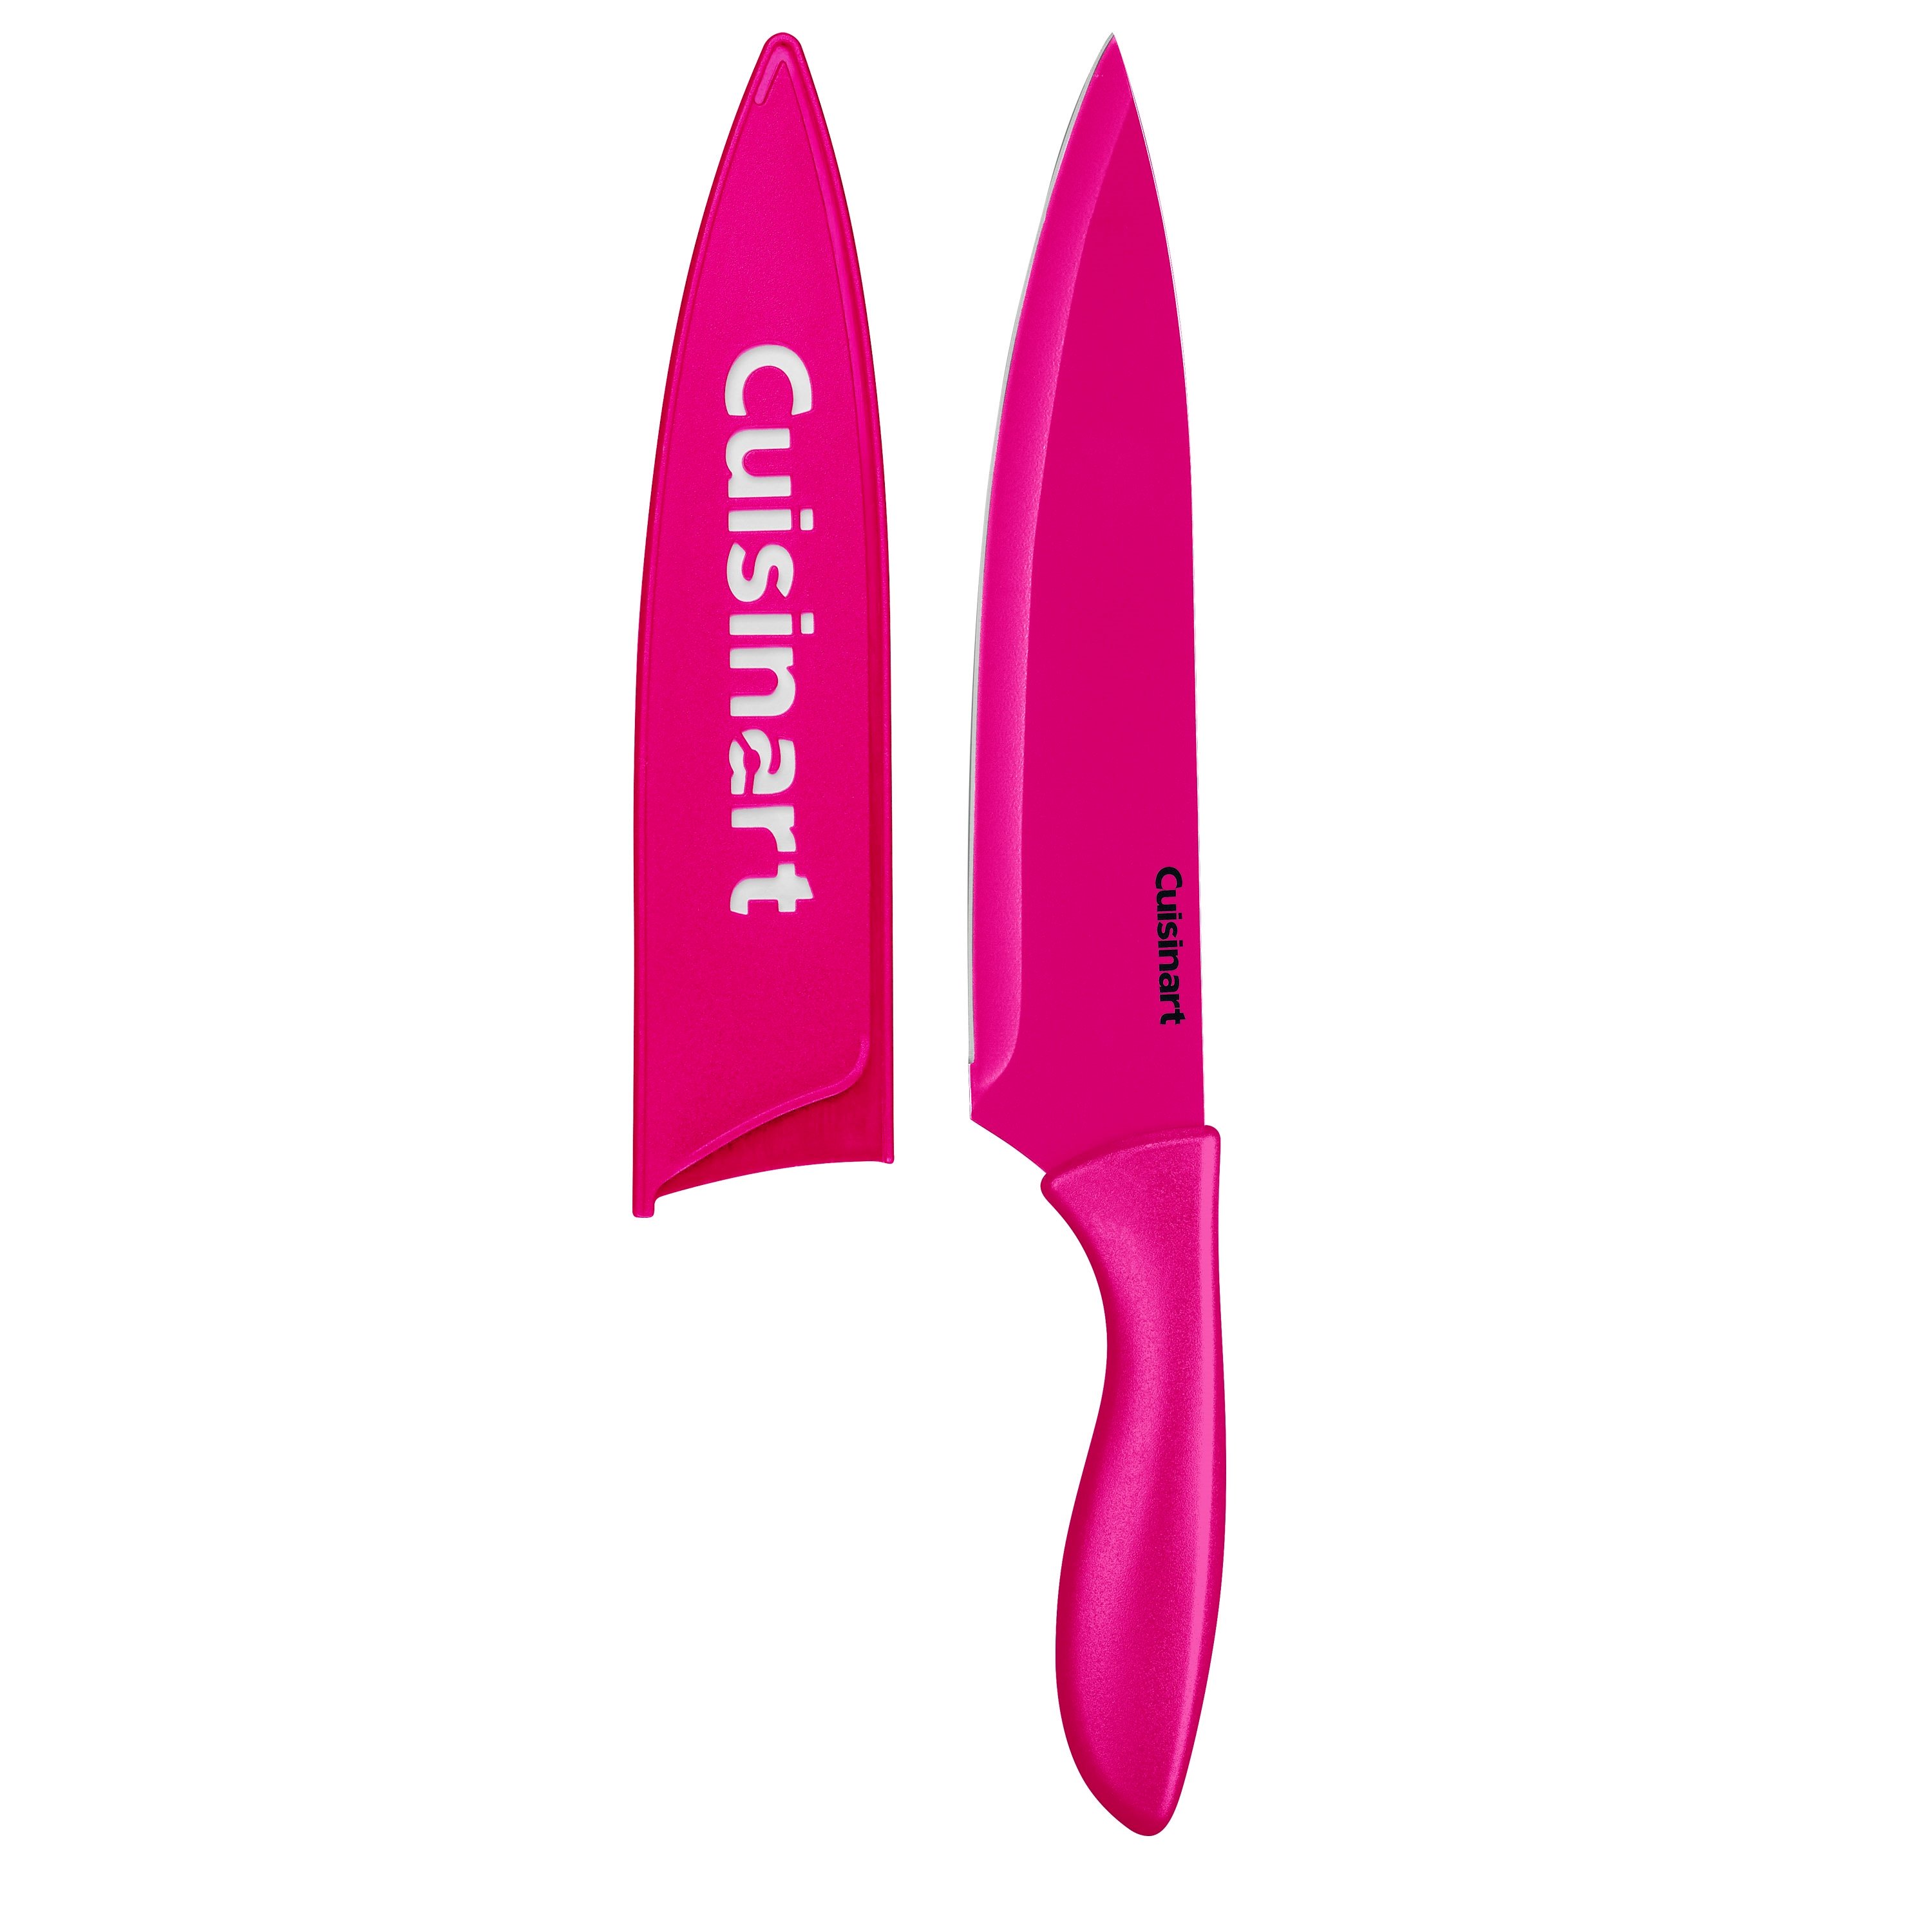 The Cuisinart Advantage Ceramic Knife Set is on 62% Off on